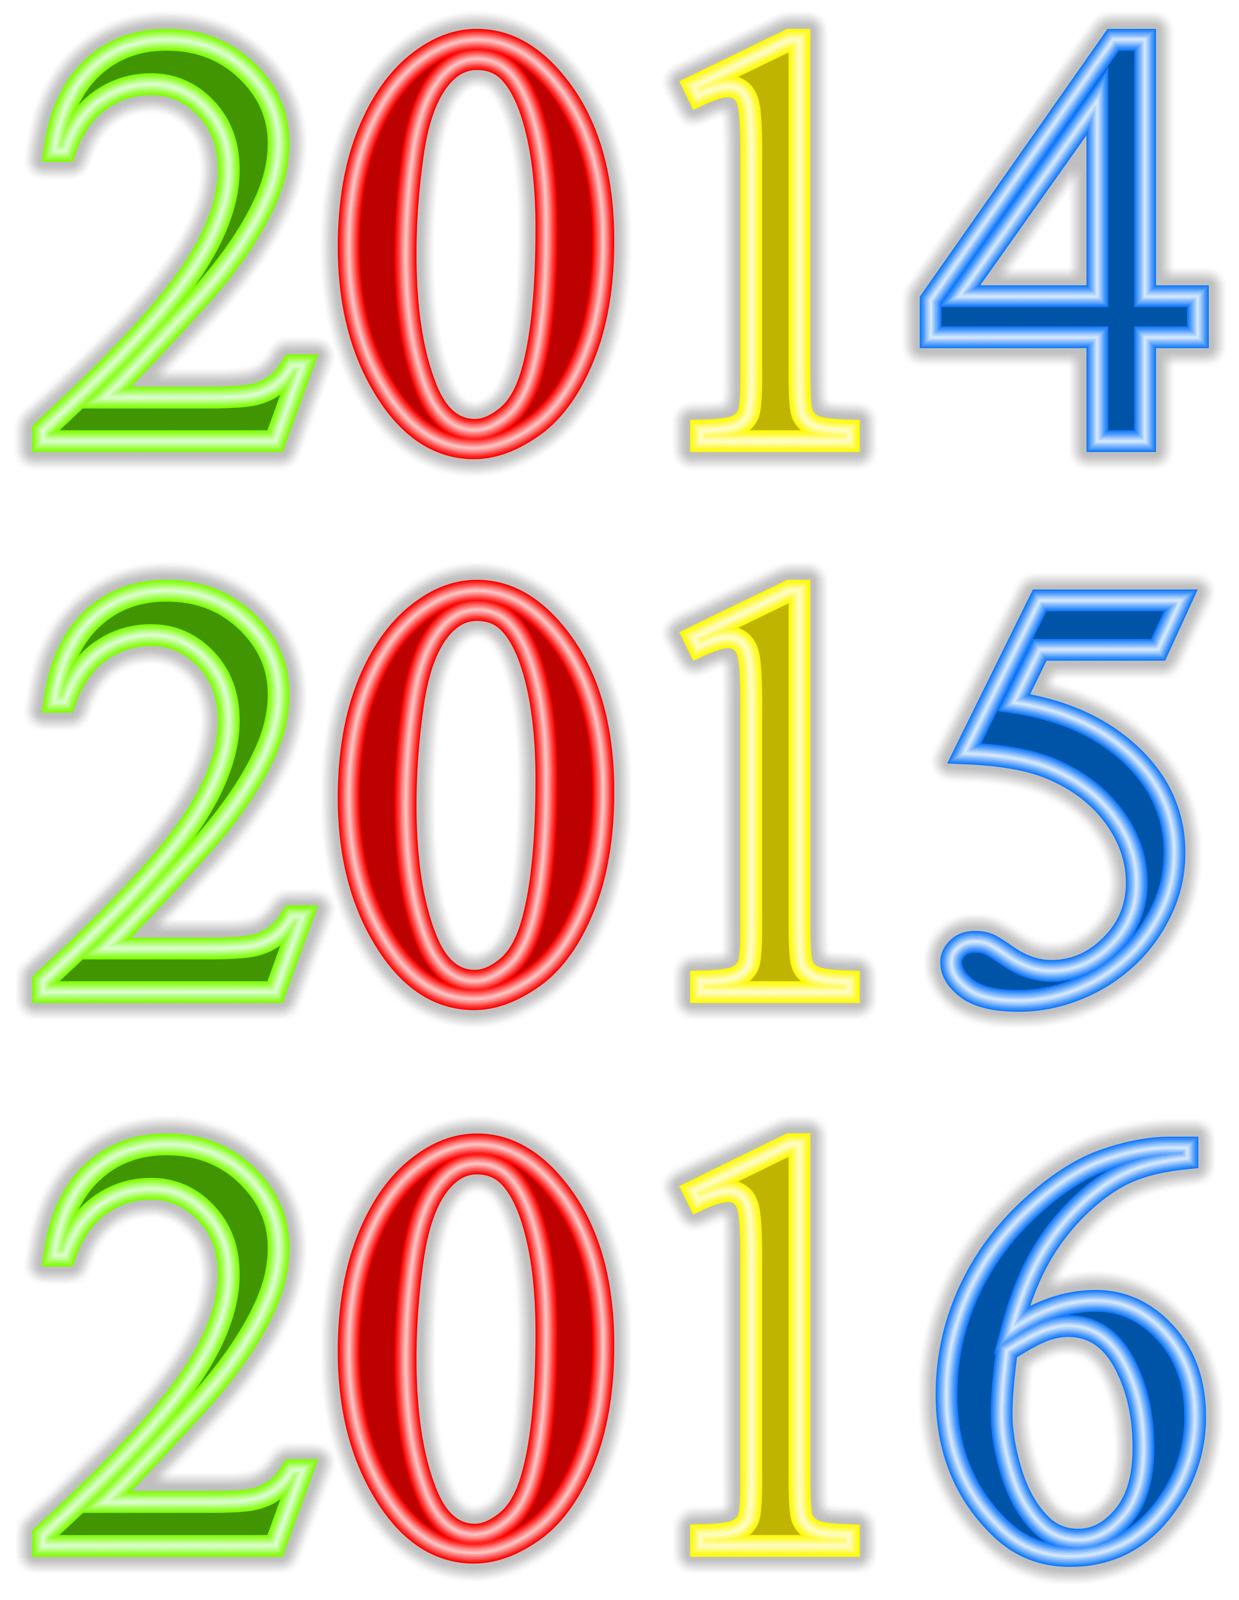 new year's day 2015 clipart - photo #27